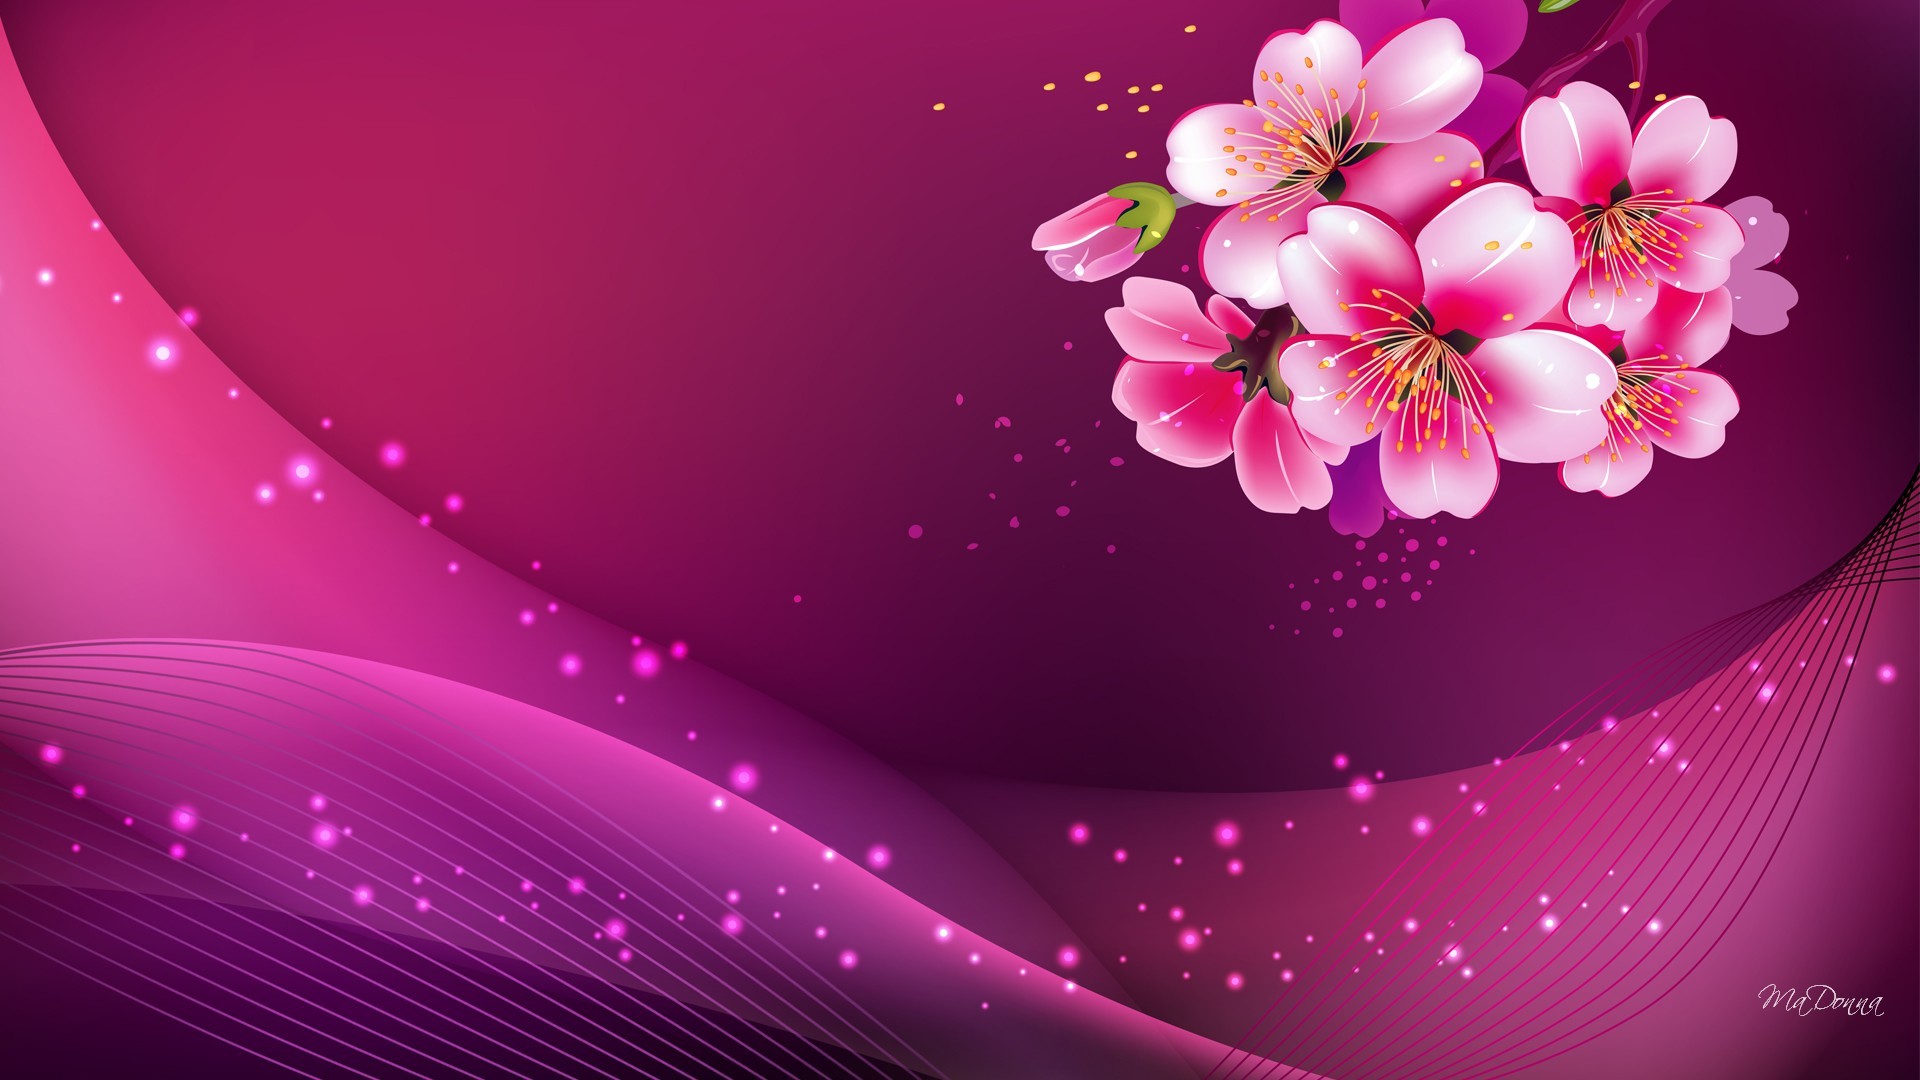 1920x1080 widescreen pink background hd image pc